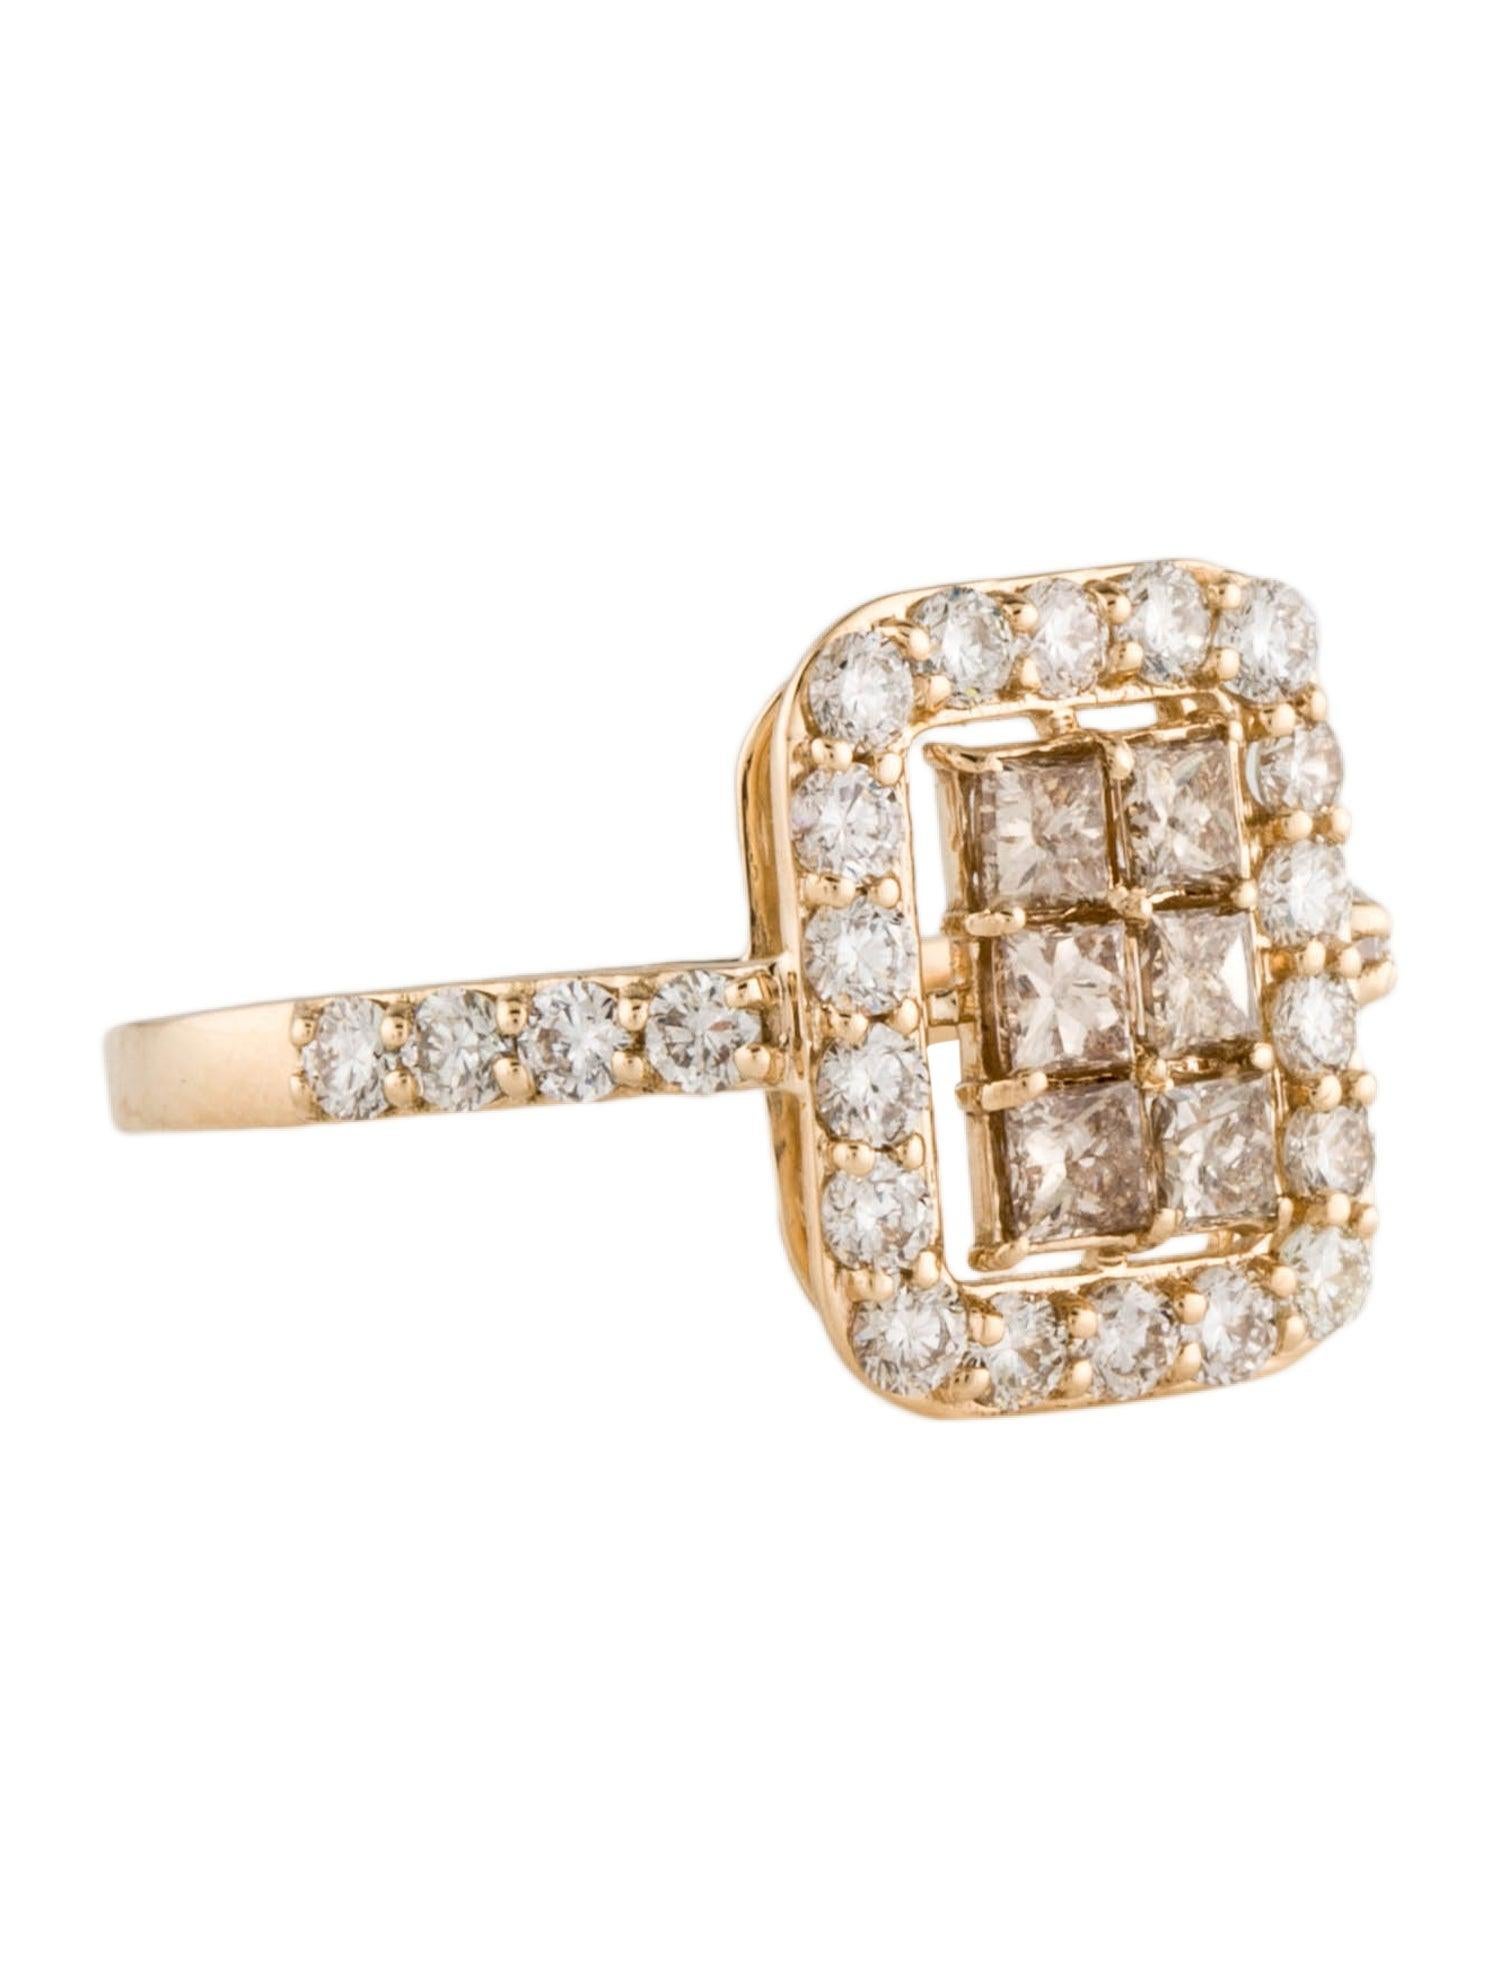 Embrace timeless elegance with our meticulously crafted 14K Yellow Gold Diamond Cocktail Ring. This stunning piece features a harmonious blend of light brown and near colorless diamonds, totaling an impressive 1.29 carats. The unique combination of